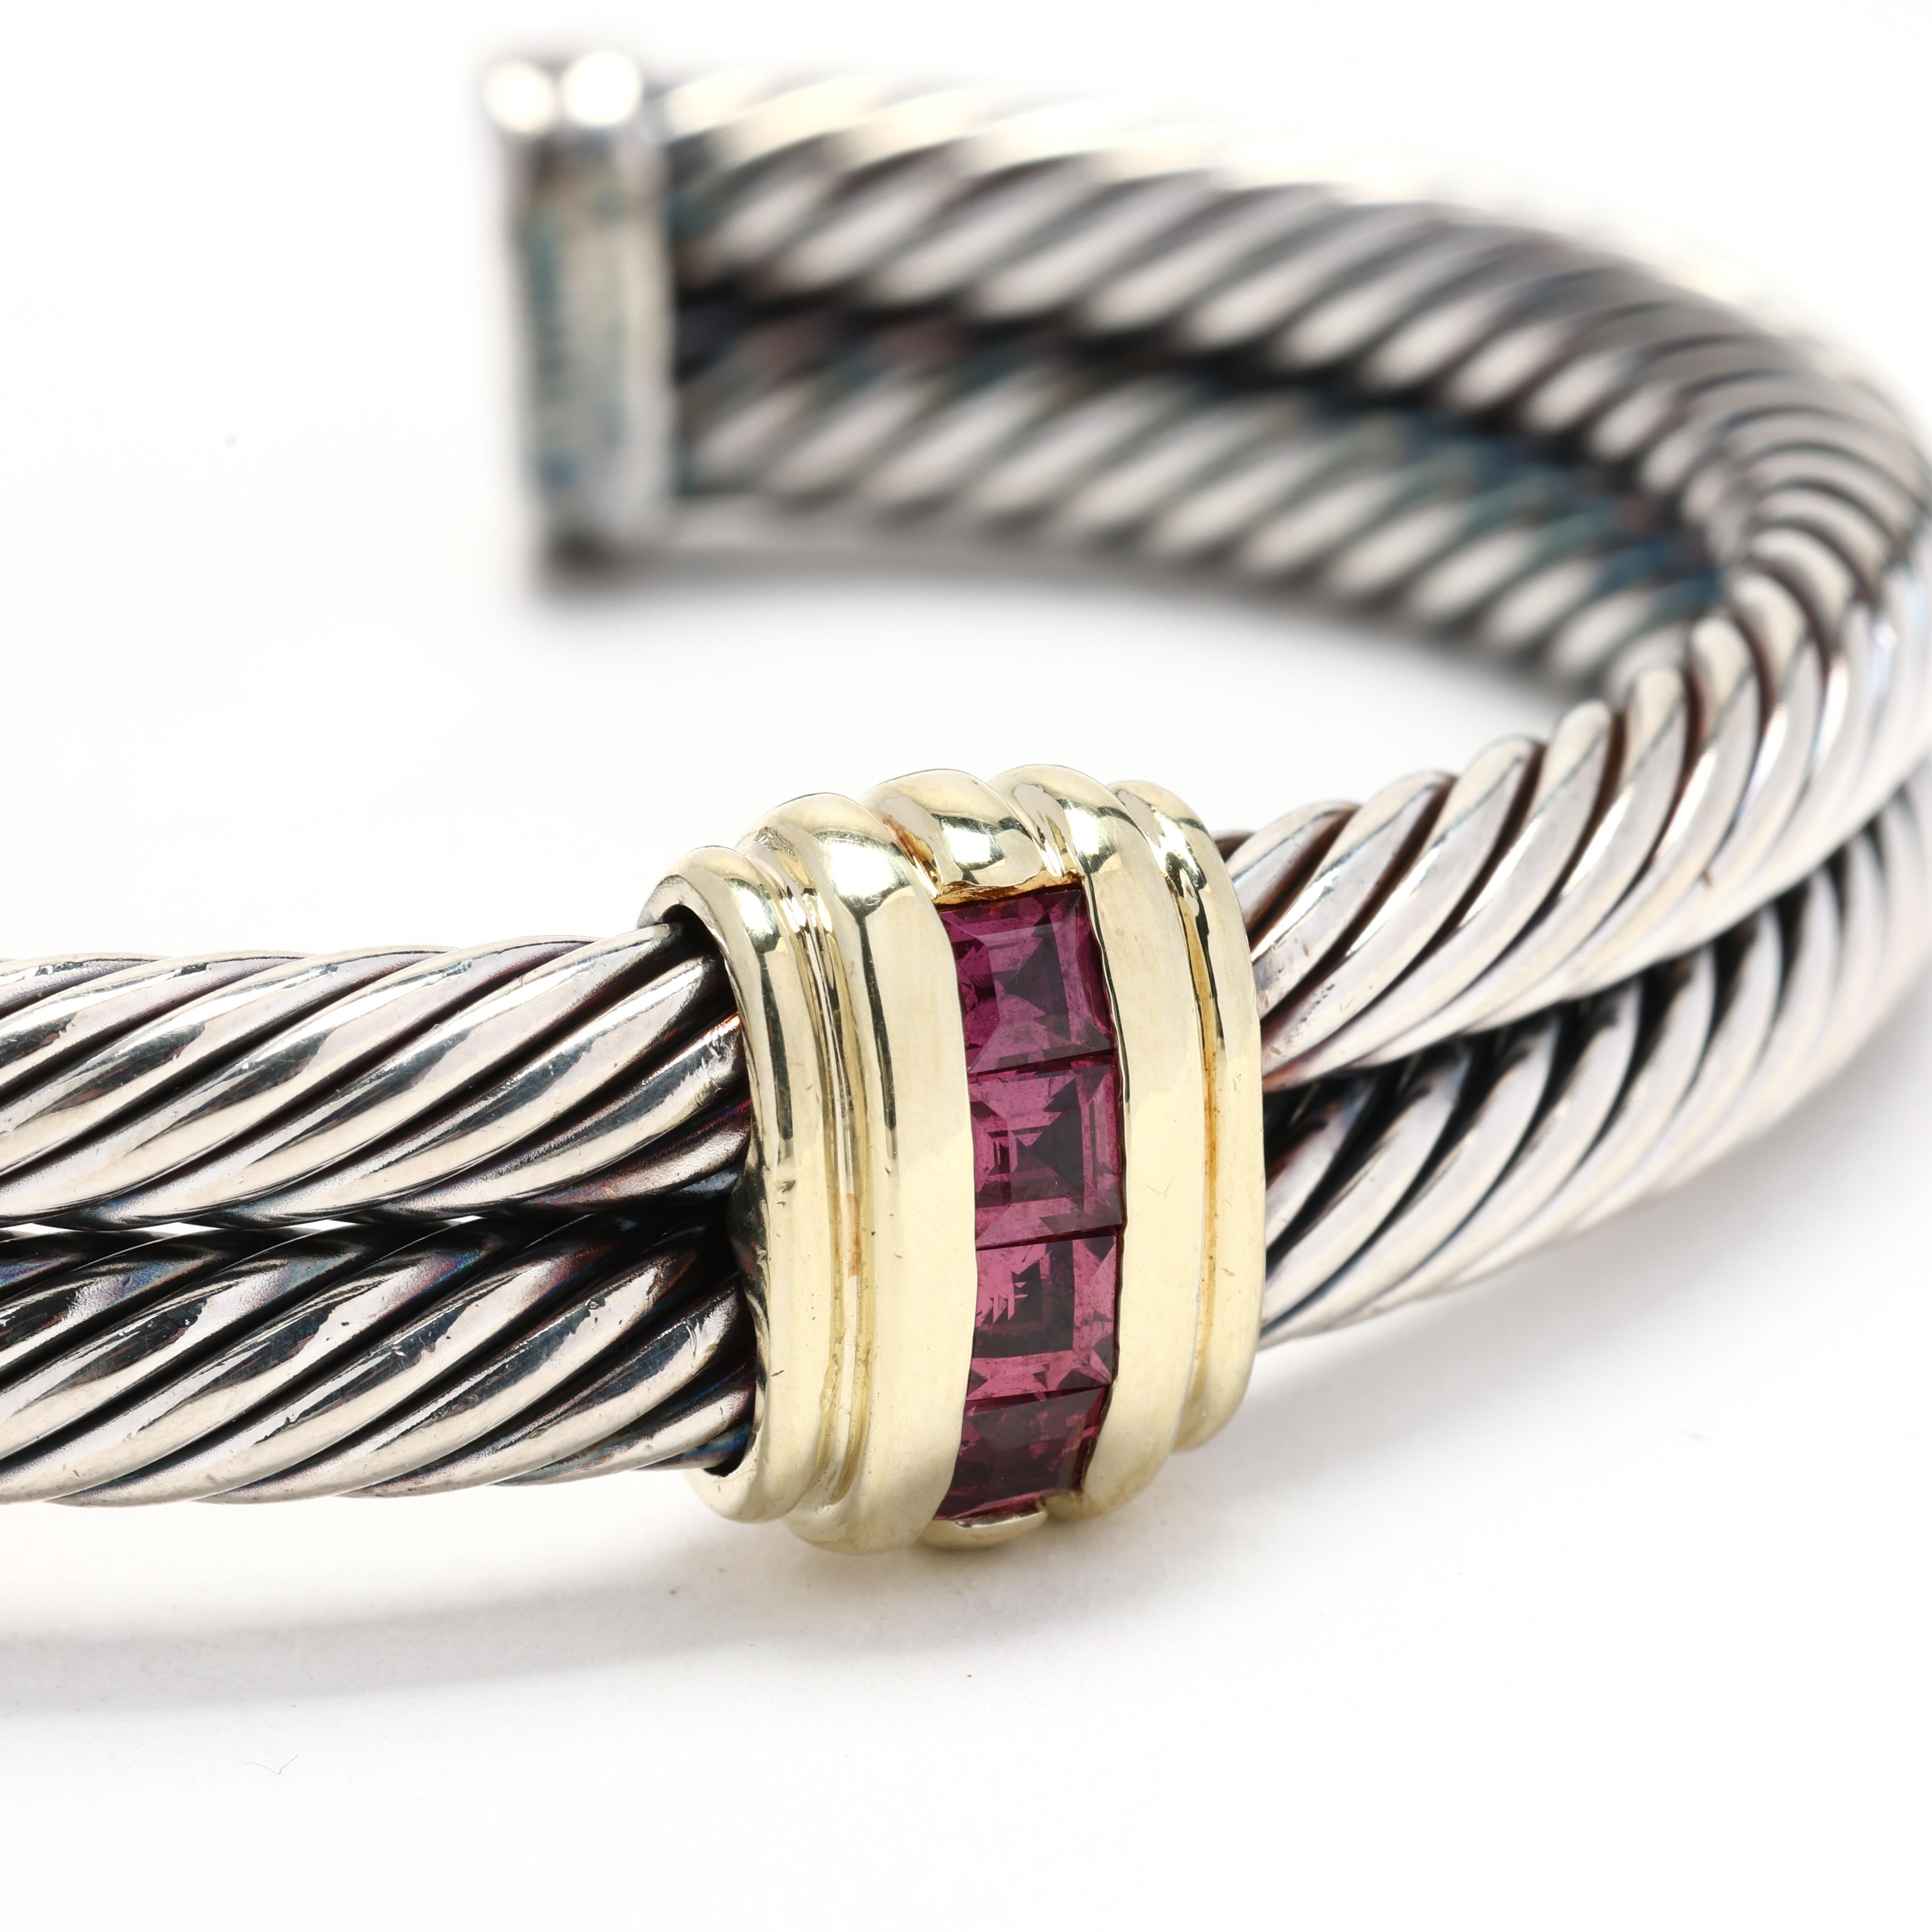 This exquisite cuff bracelet from renowned designer David Yurman showcases the perfect combination of 14k yellow gold and sterling silver. The bracelet features a bold and eye-catching design with a unique combination of textures and materials.